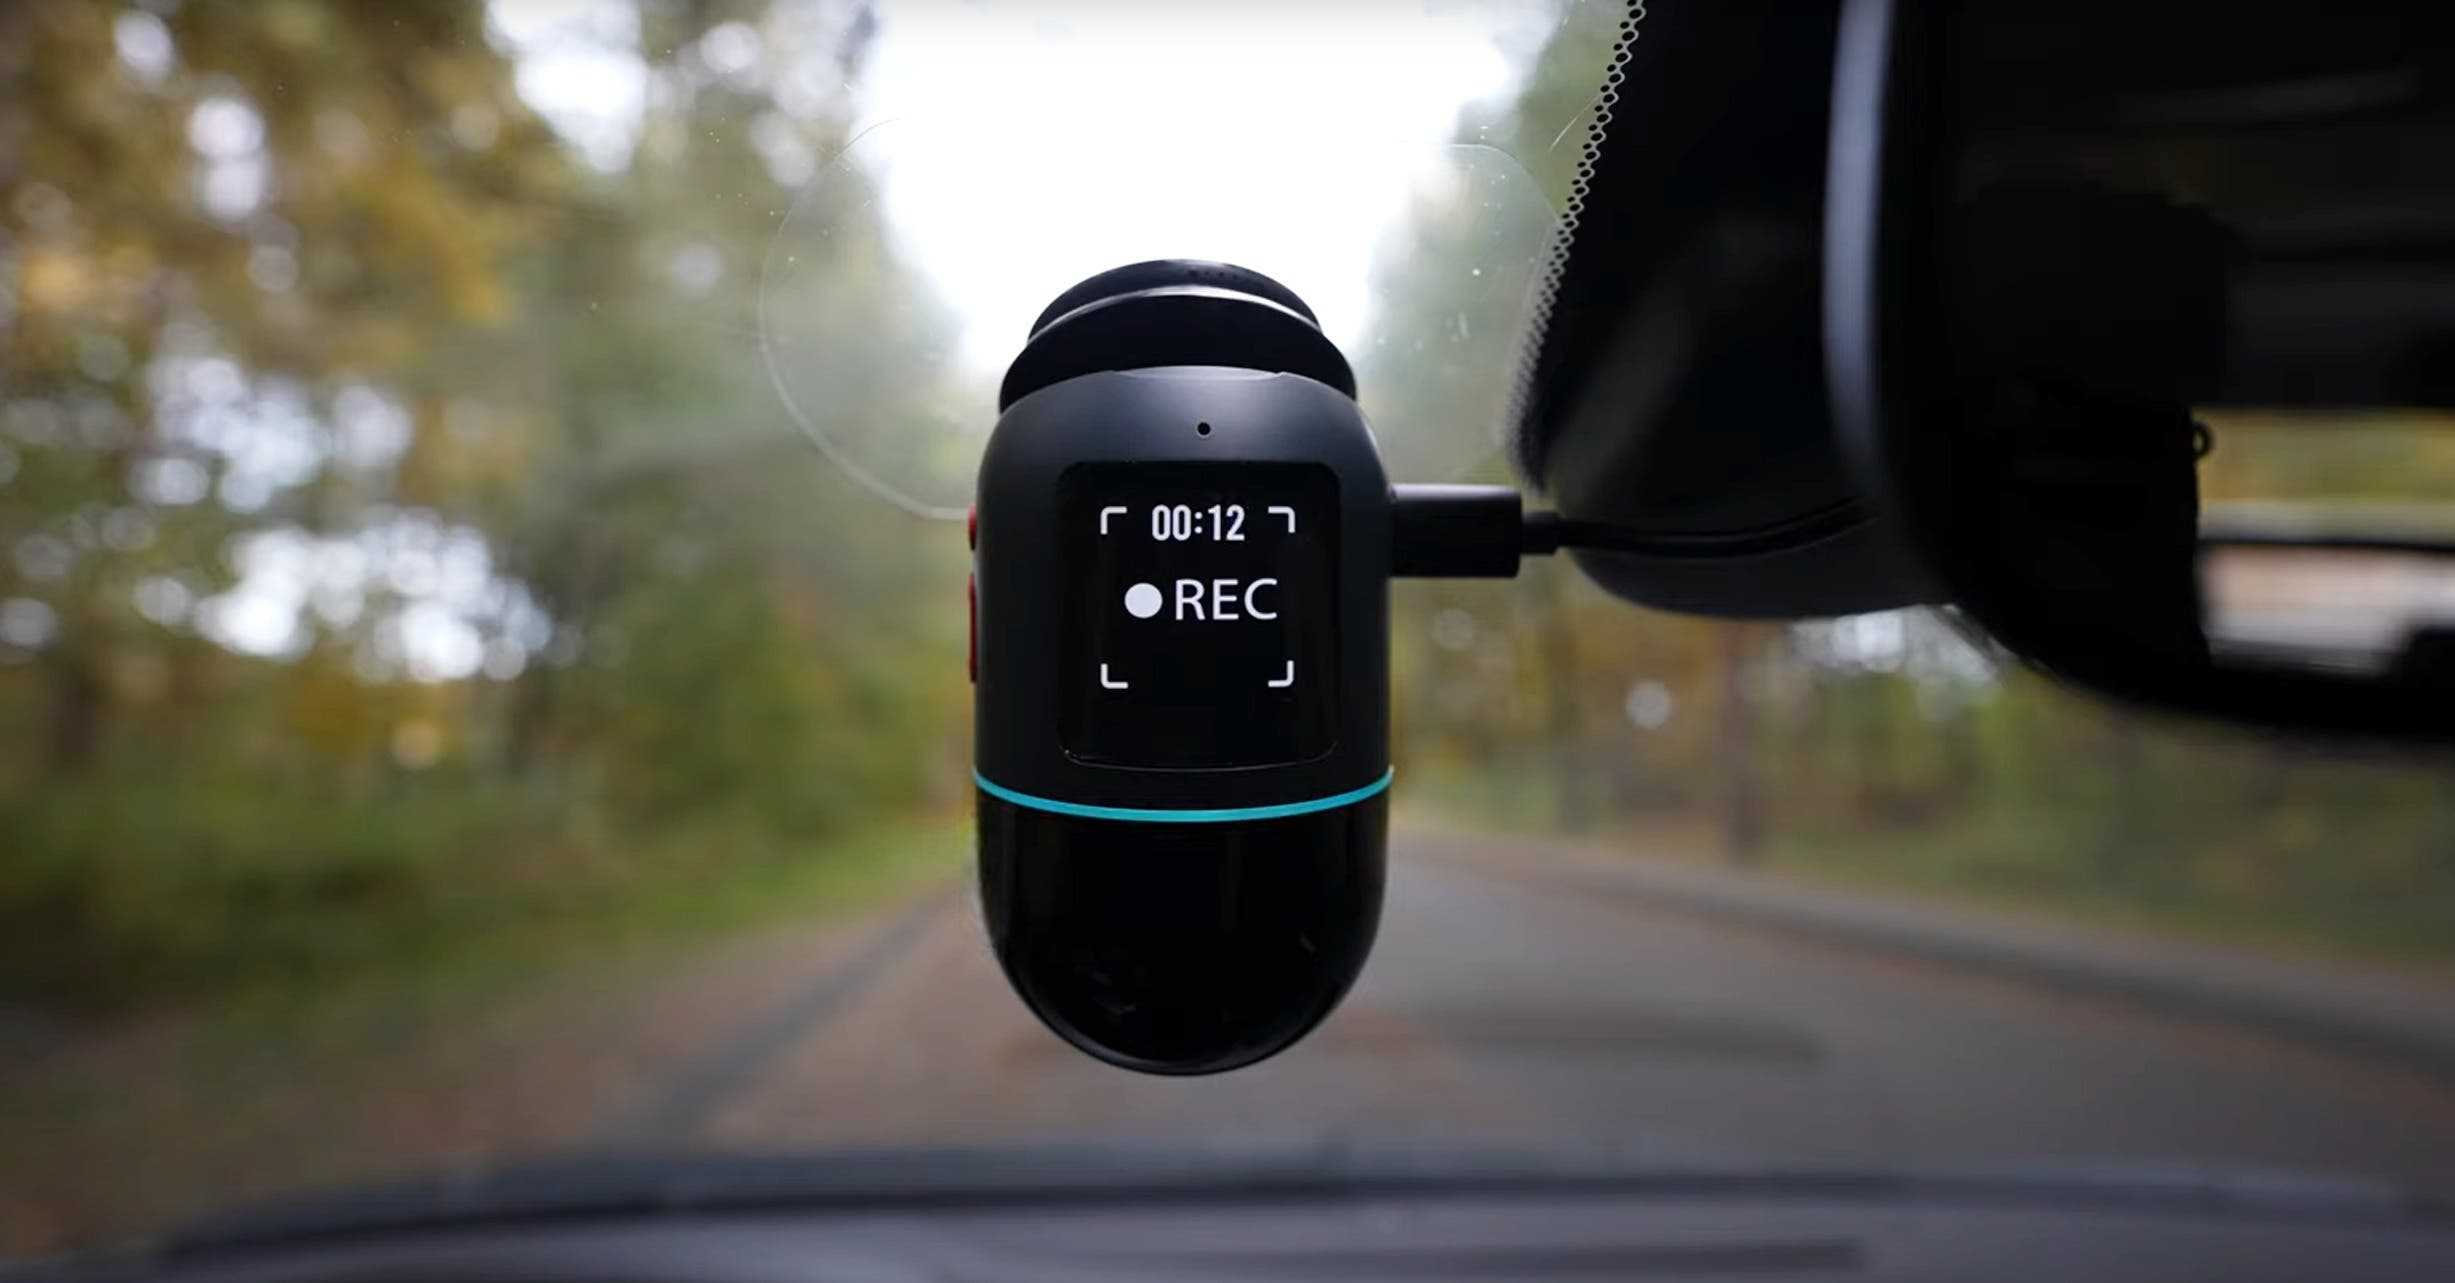 70mai Dash Cam Omni review - 360° dashcam let's you record outside and  inside! - The Gadgeteer